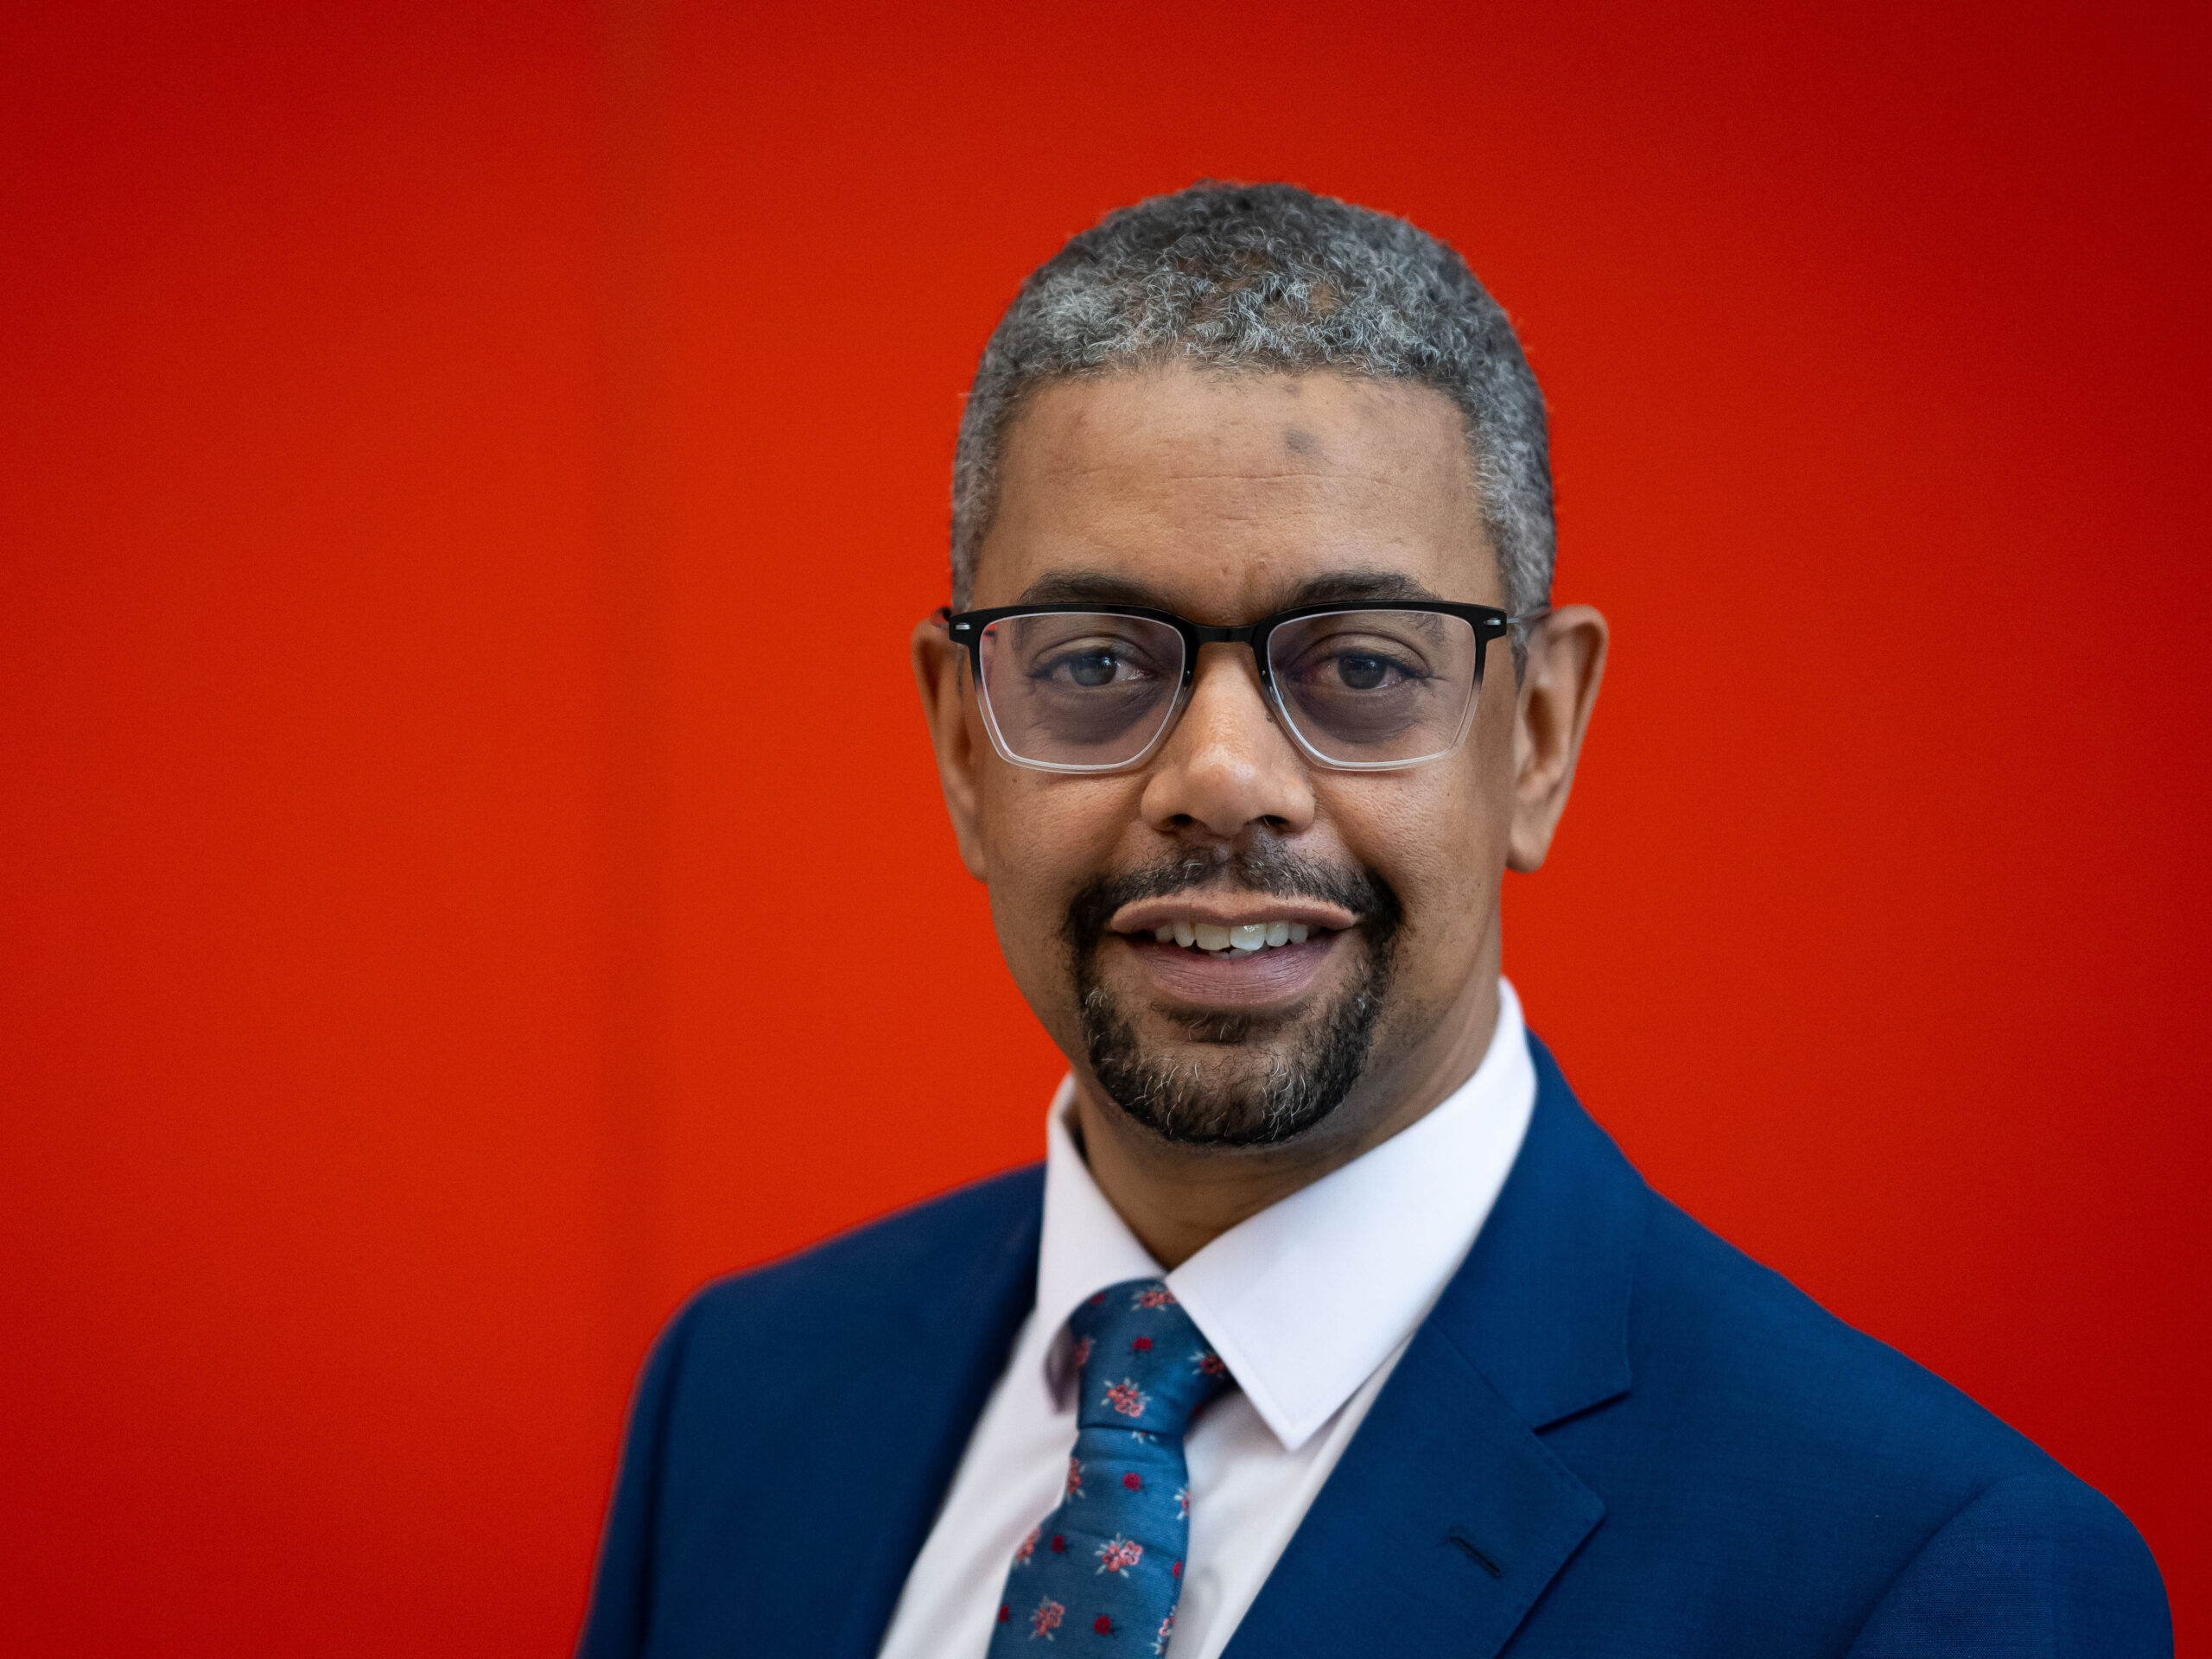 Meet Europe’s first Black head of government — in Wales